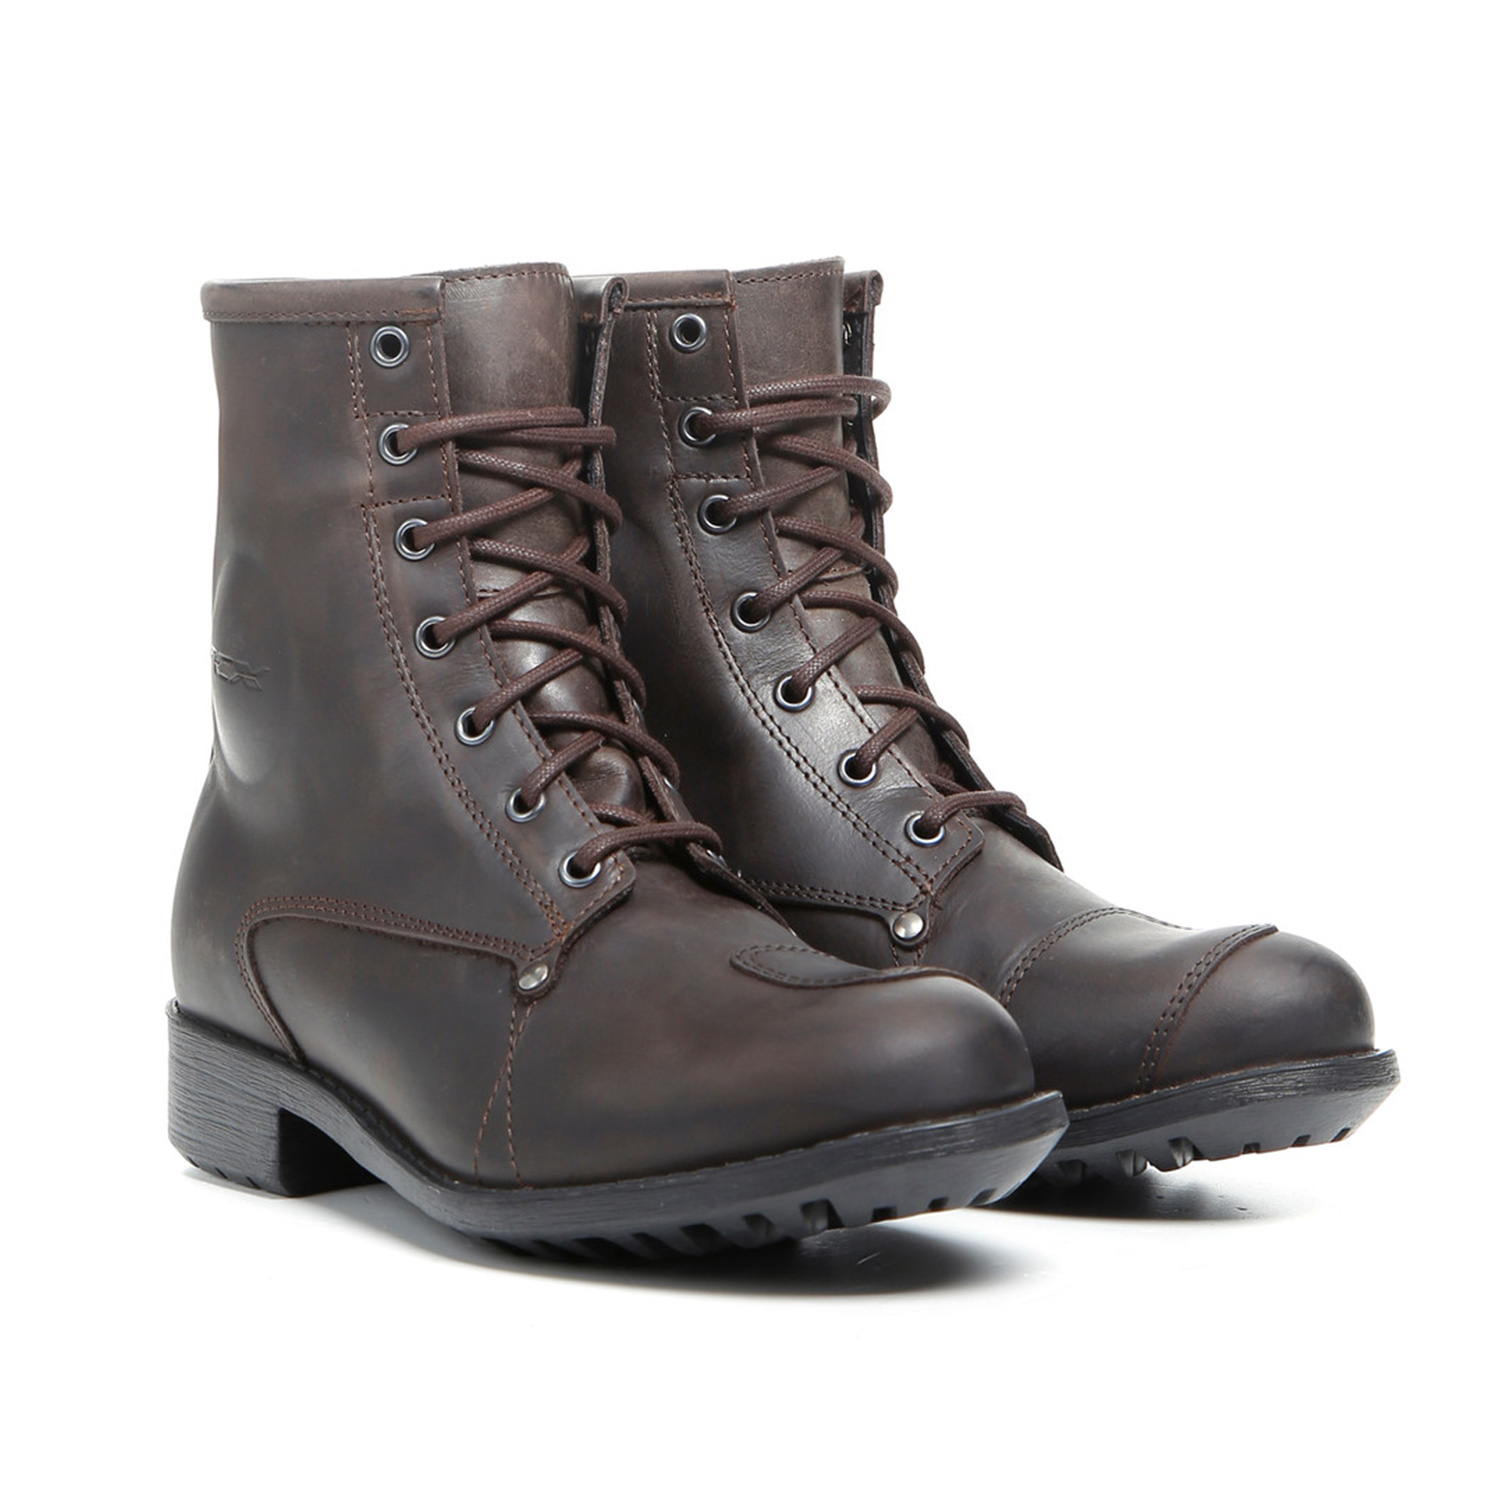 Image of TCX Lady Blend WP Brown Size 37 ID 8000958115643